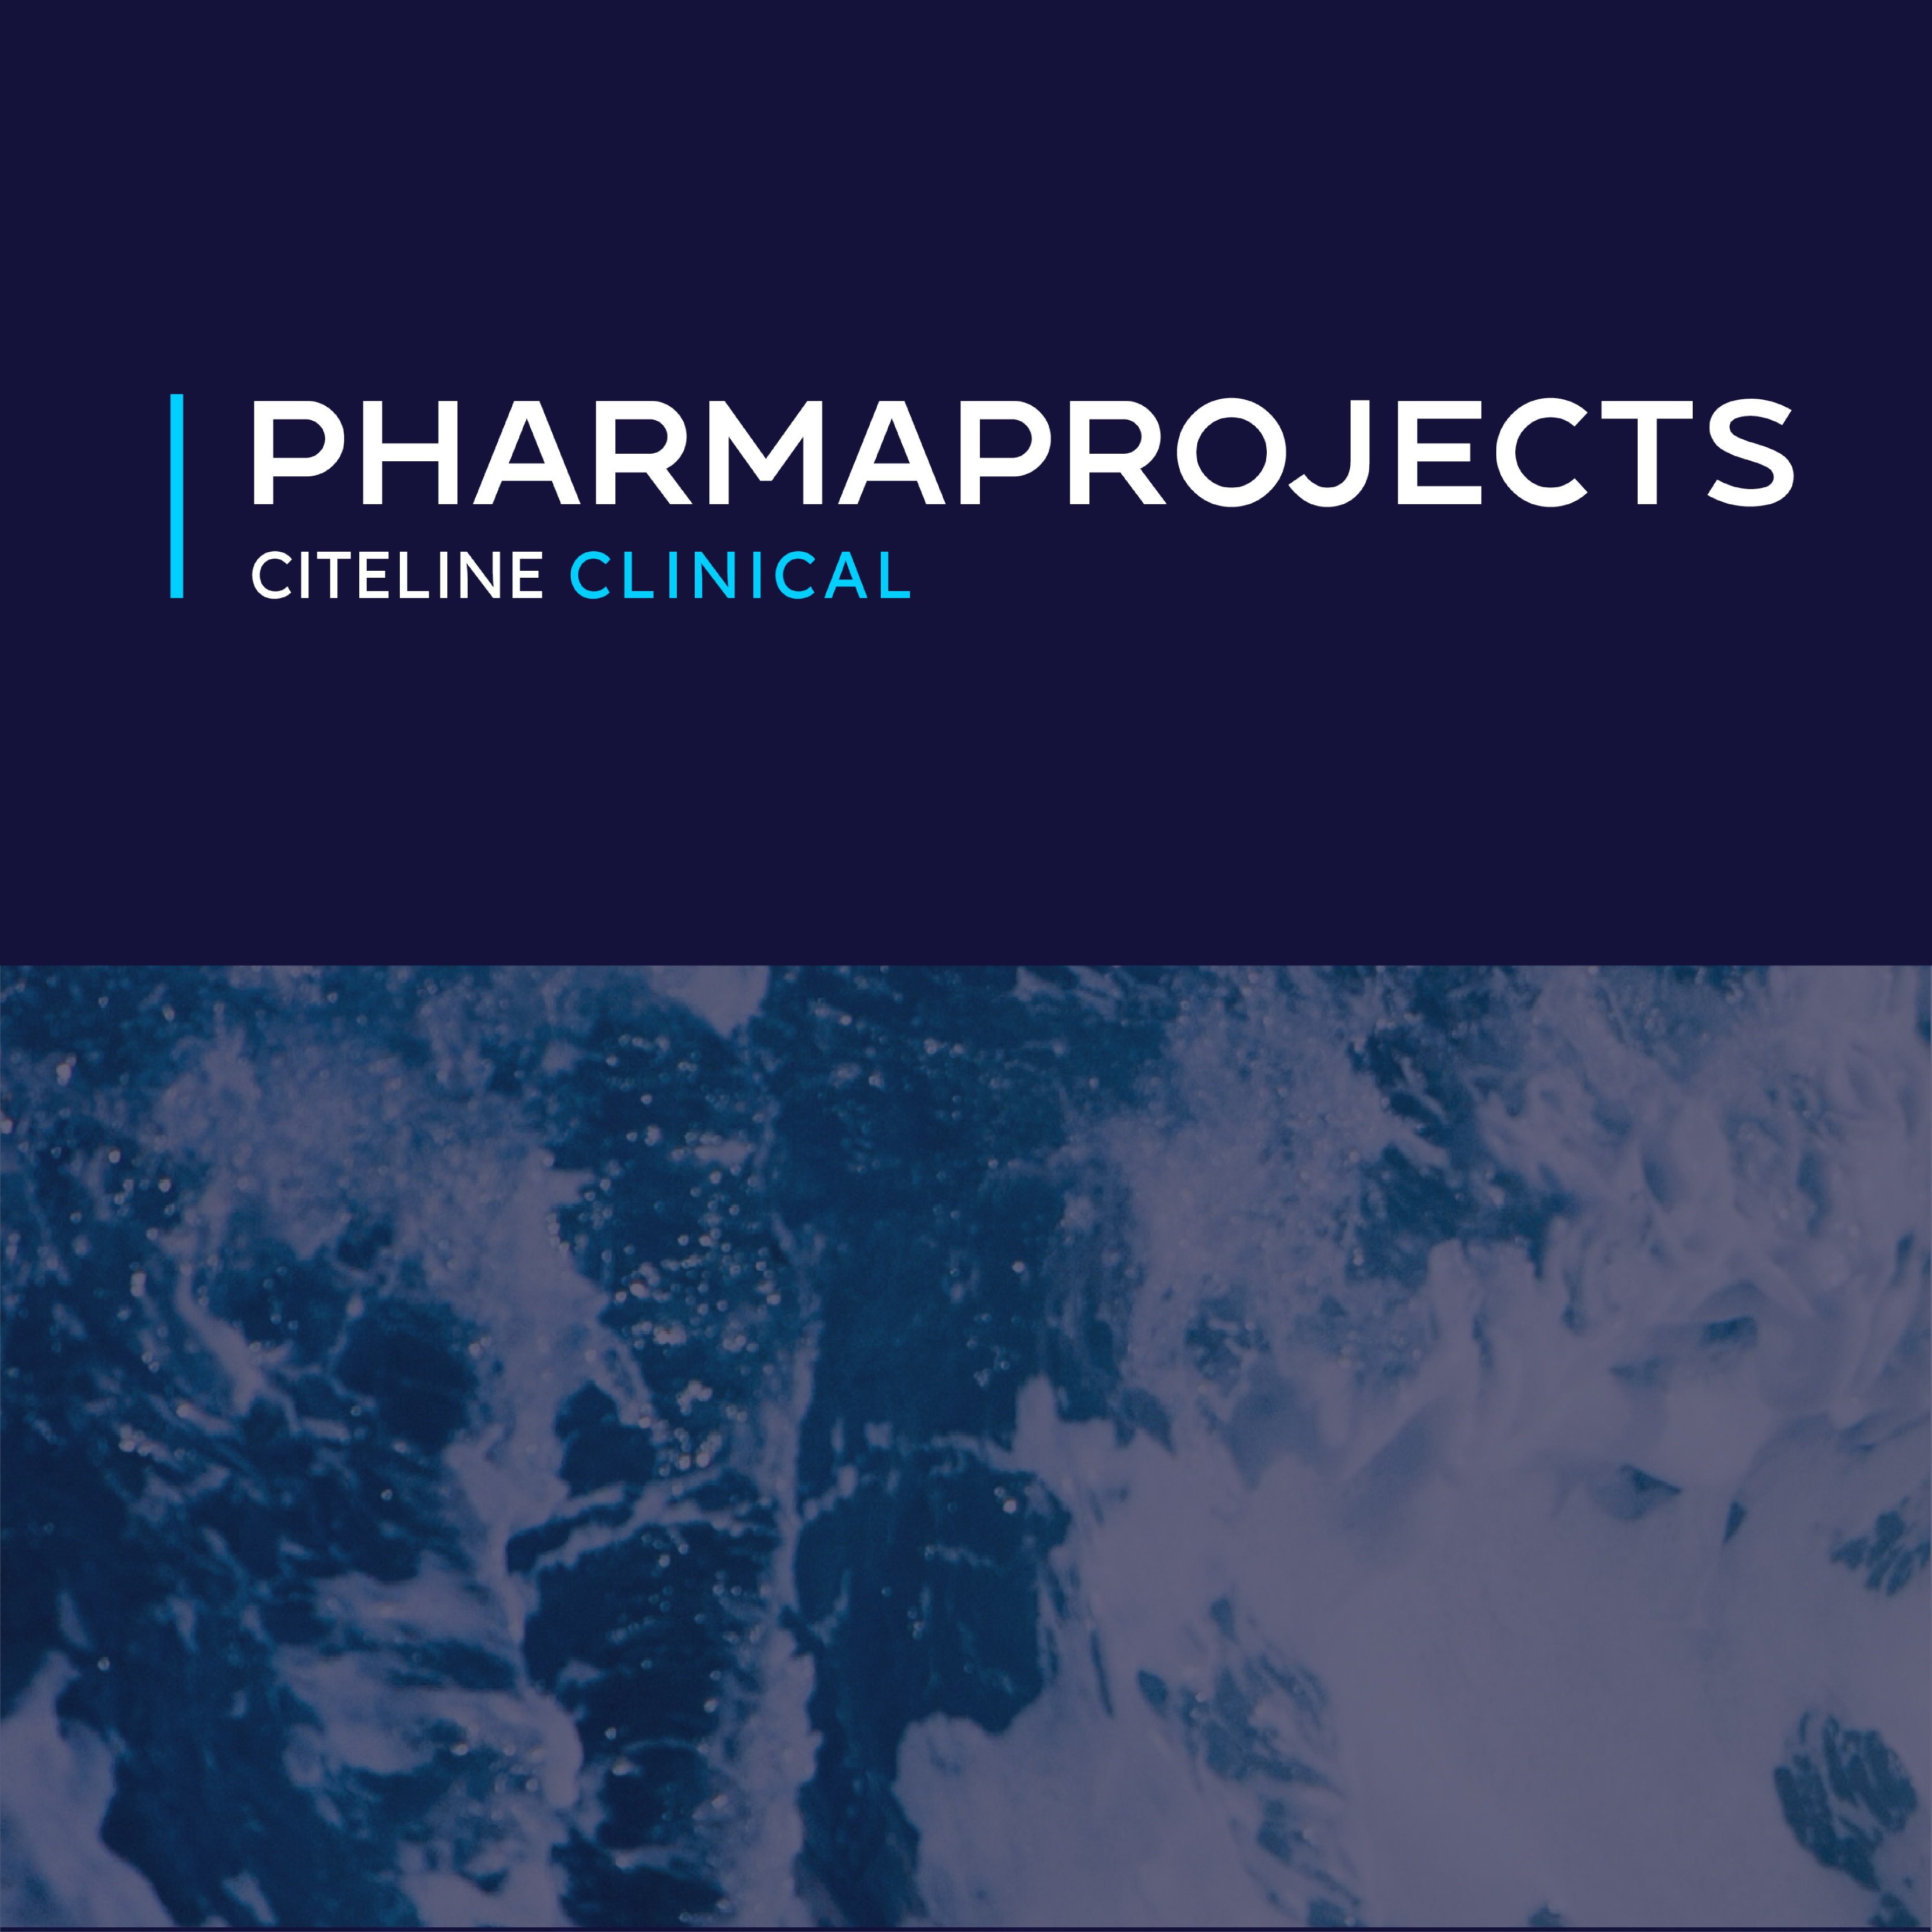 Book a demo to learn more about Pharmaprojects.